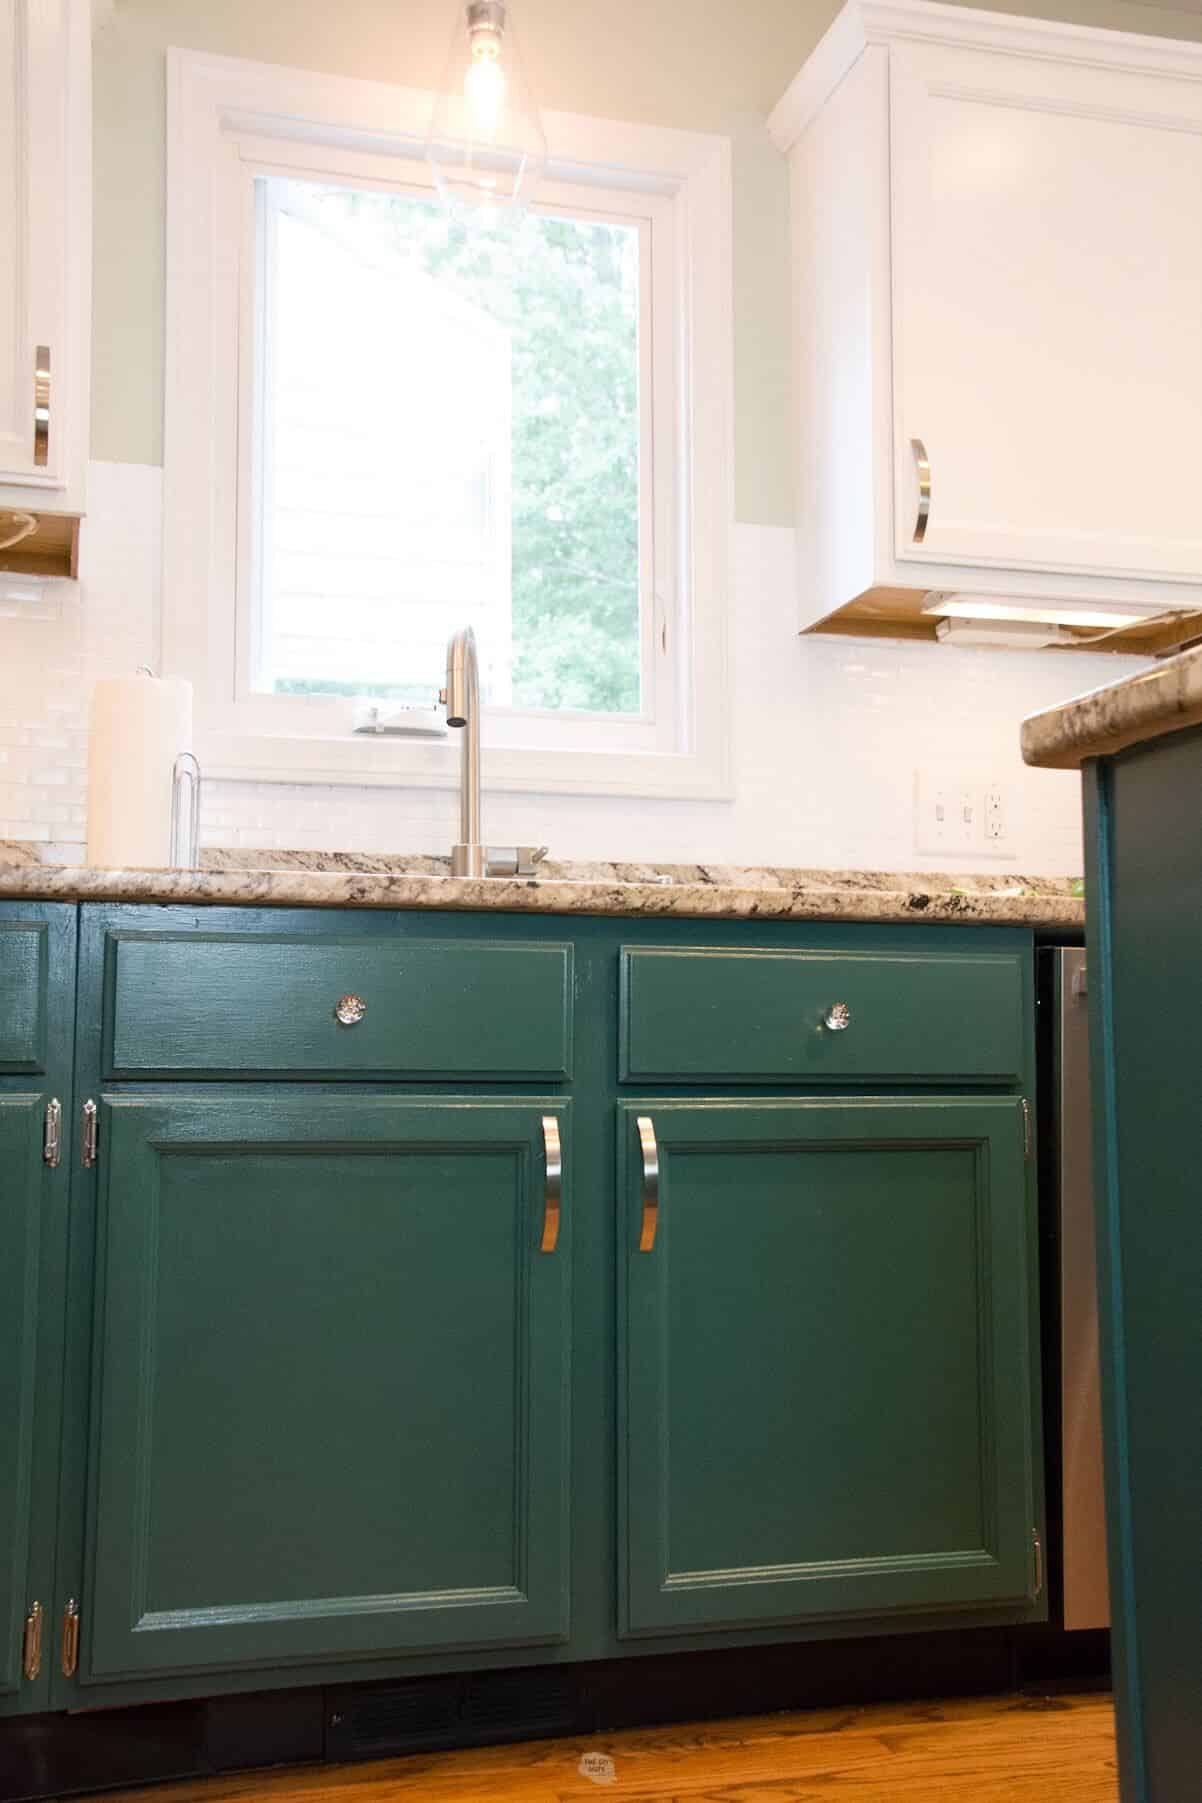 green lower kitchen cabinets and white upper cabinets by kitchen sink.